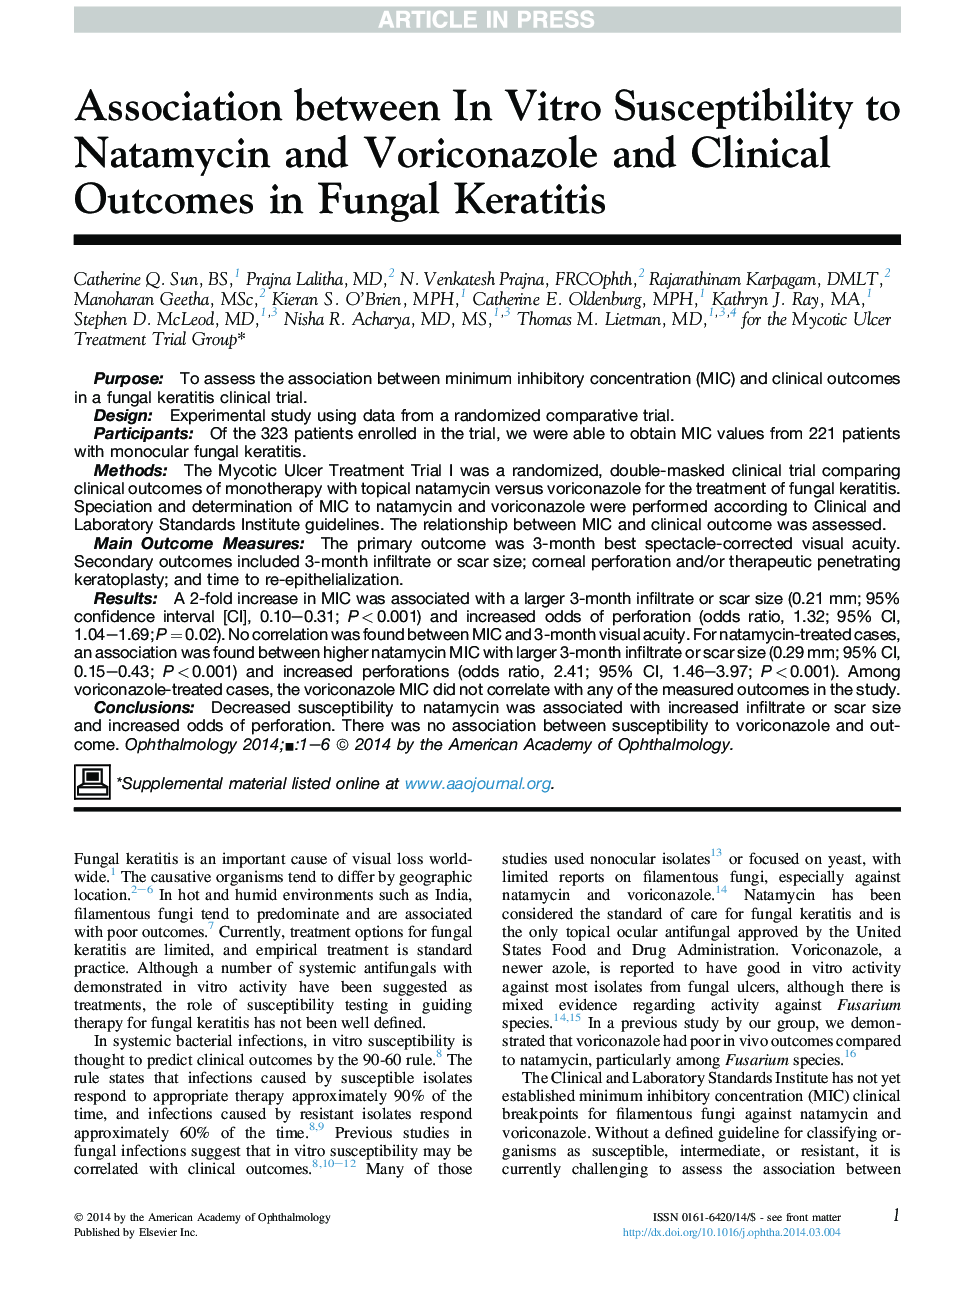 Association between In Vitro Susceptibility to Natamycin and Voriconazole and Clinical Outcomes in Fungal Keratitis